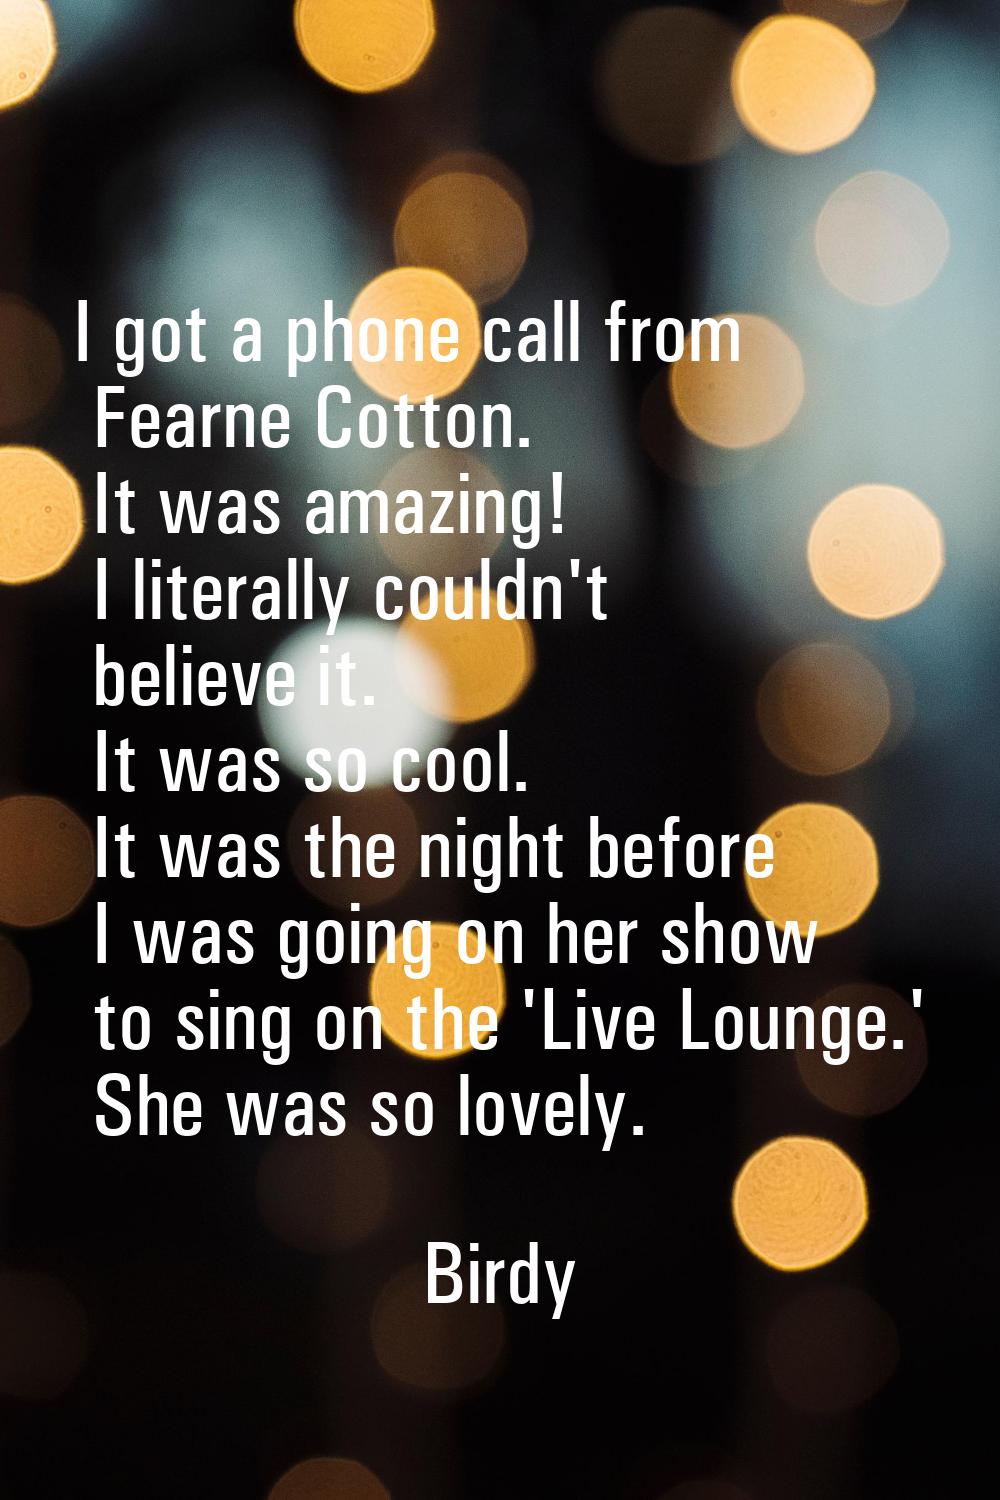 I got a phone call from Fearne Cotton. It was amazing! I literally couldn't believe it. It was so c